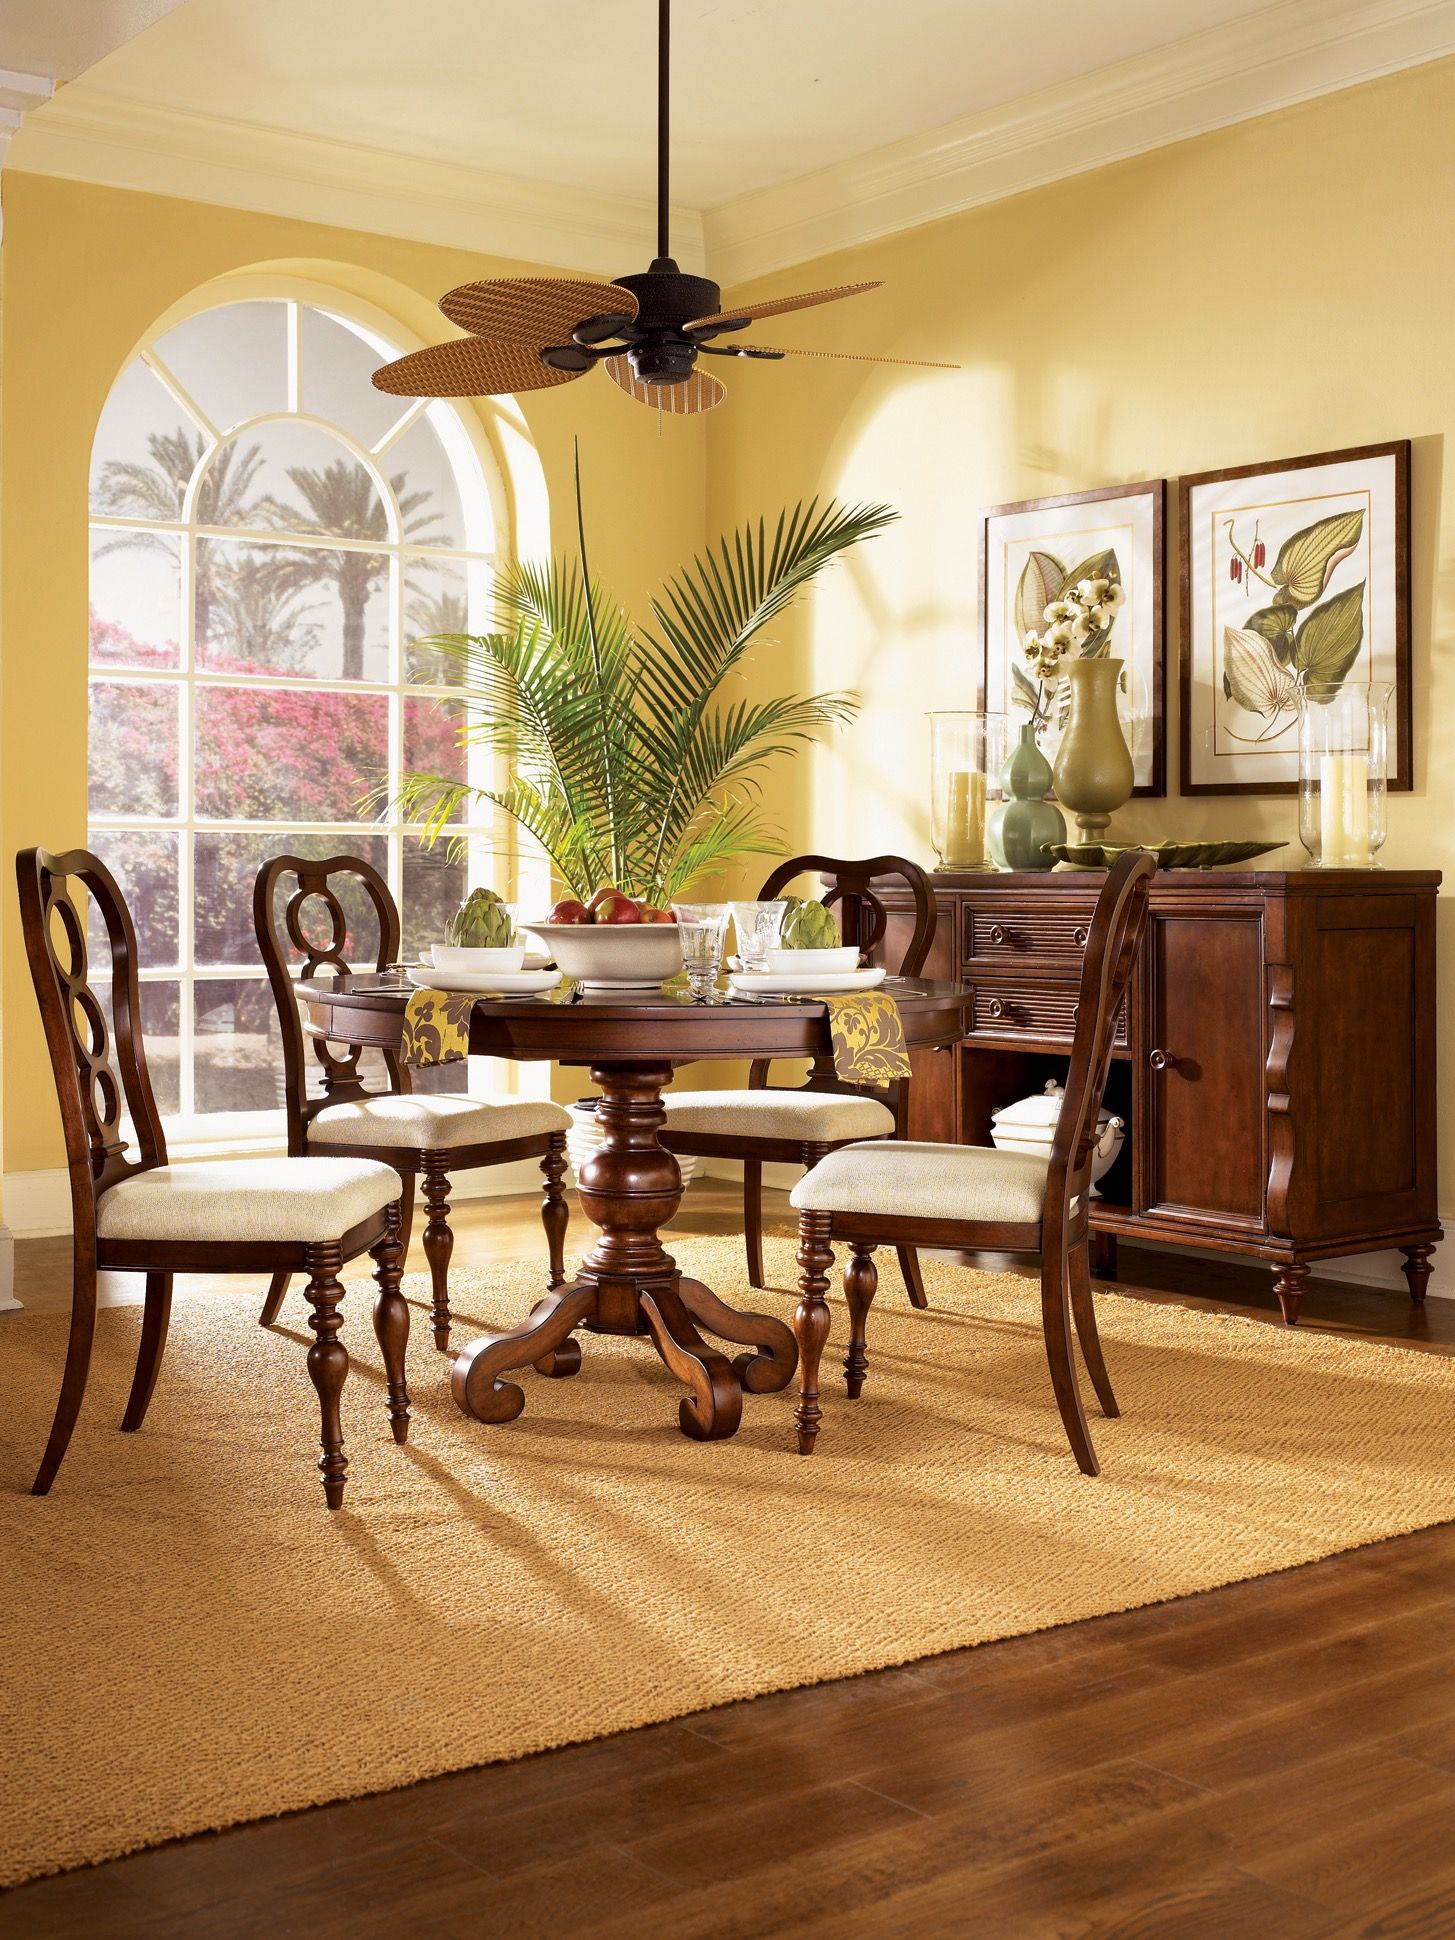 Yellow Dining Room With Tropical Accents (View 27 of 30)